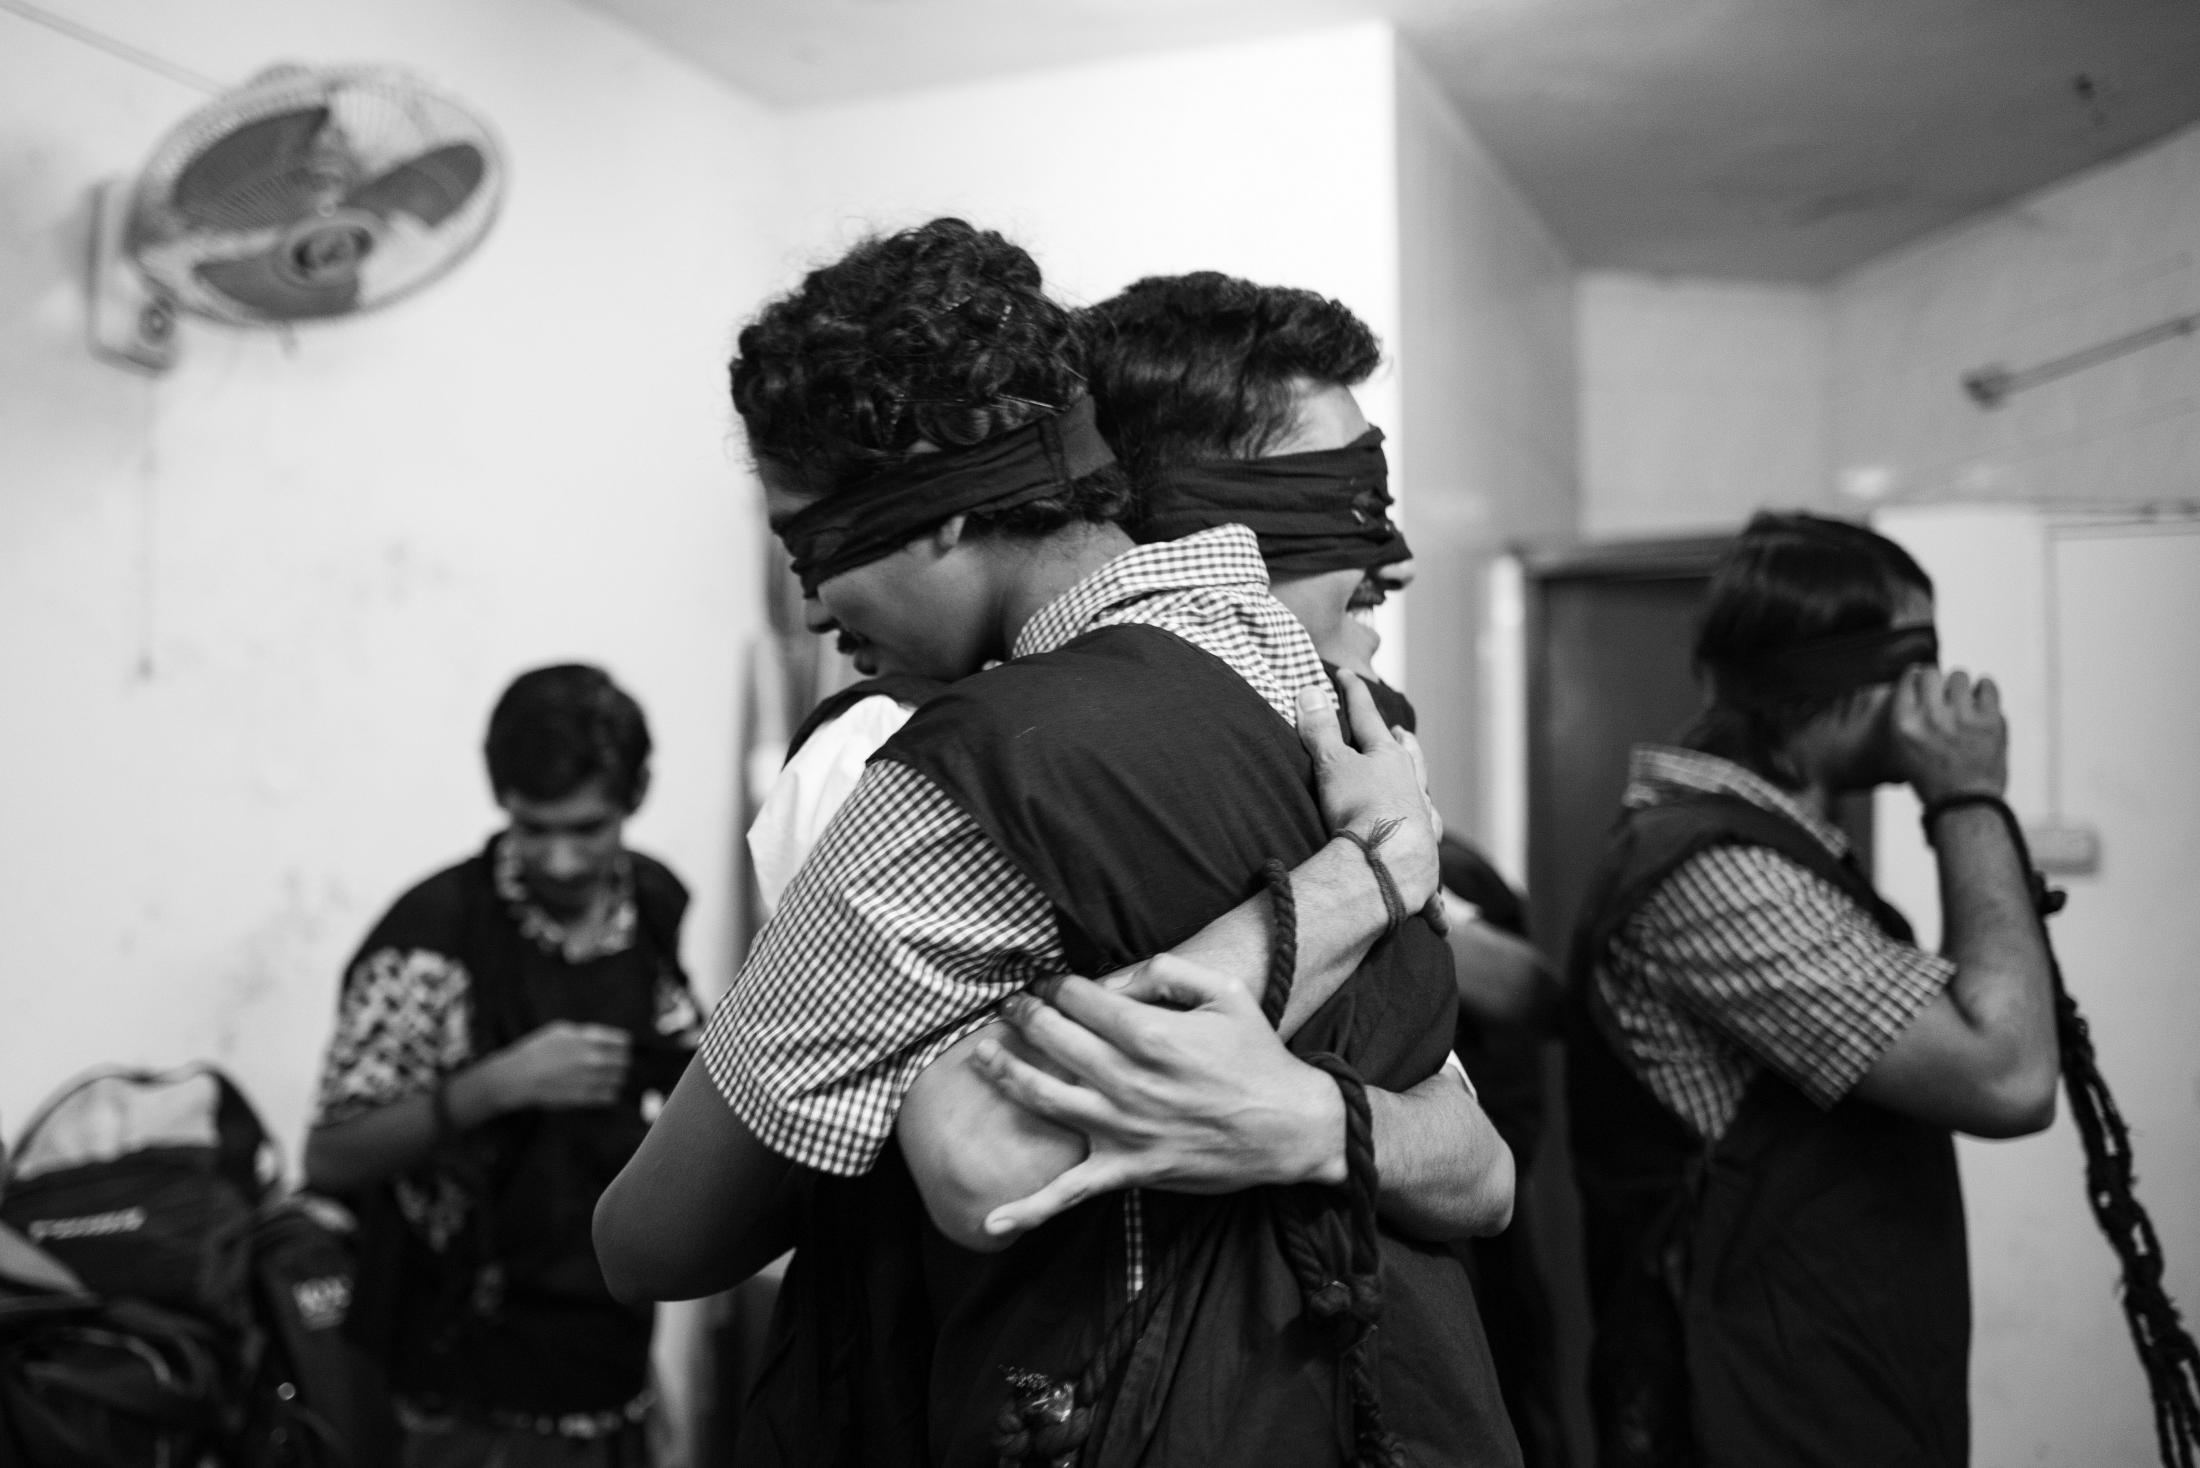 The Unseen Stage - They are saving their courage by hugging each other in...